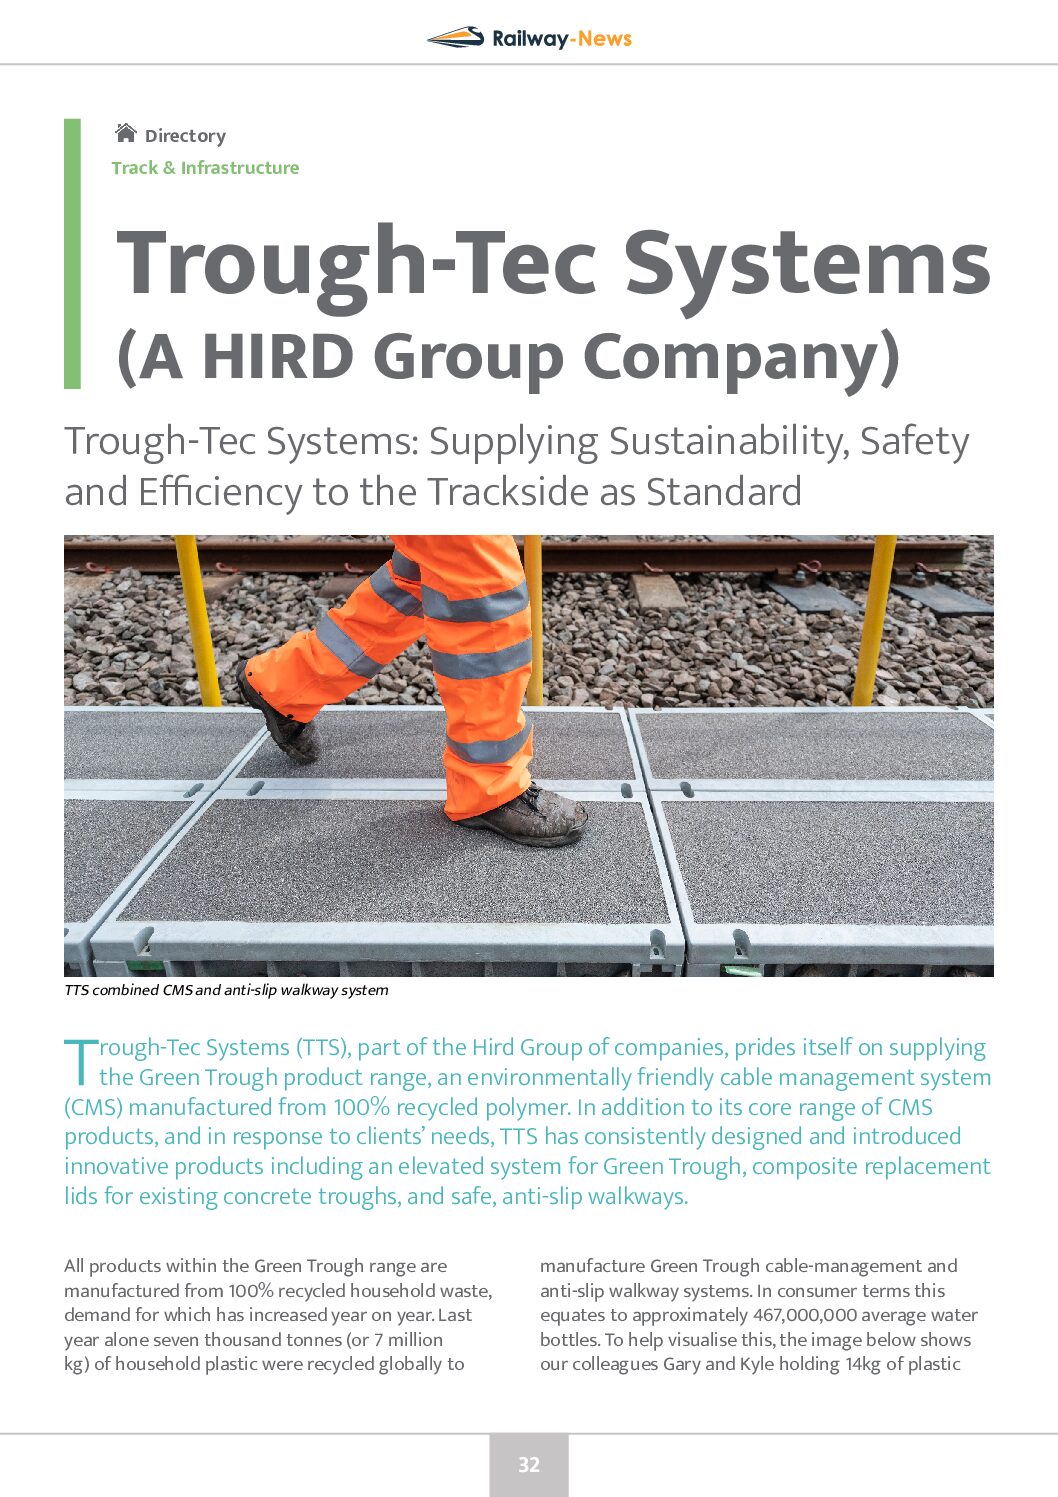 Trough-Tec Systems: Supplying Sustainability, Safety & Efficiency